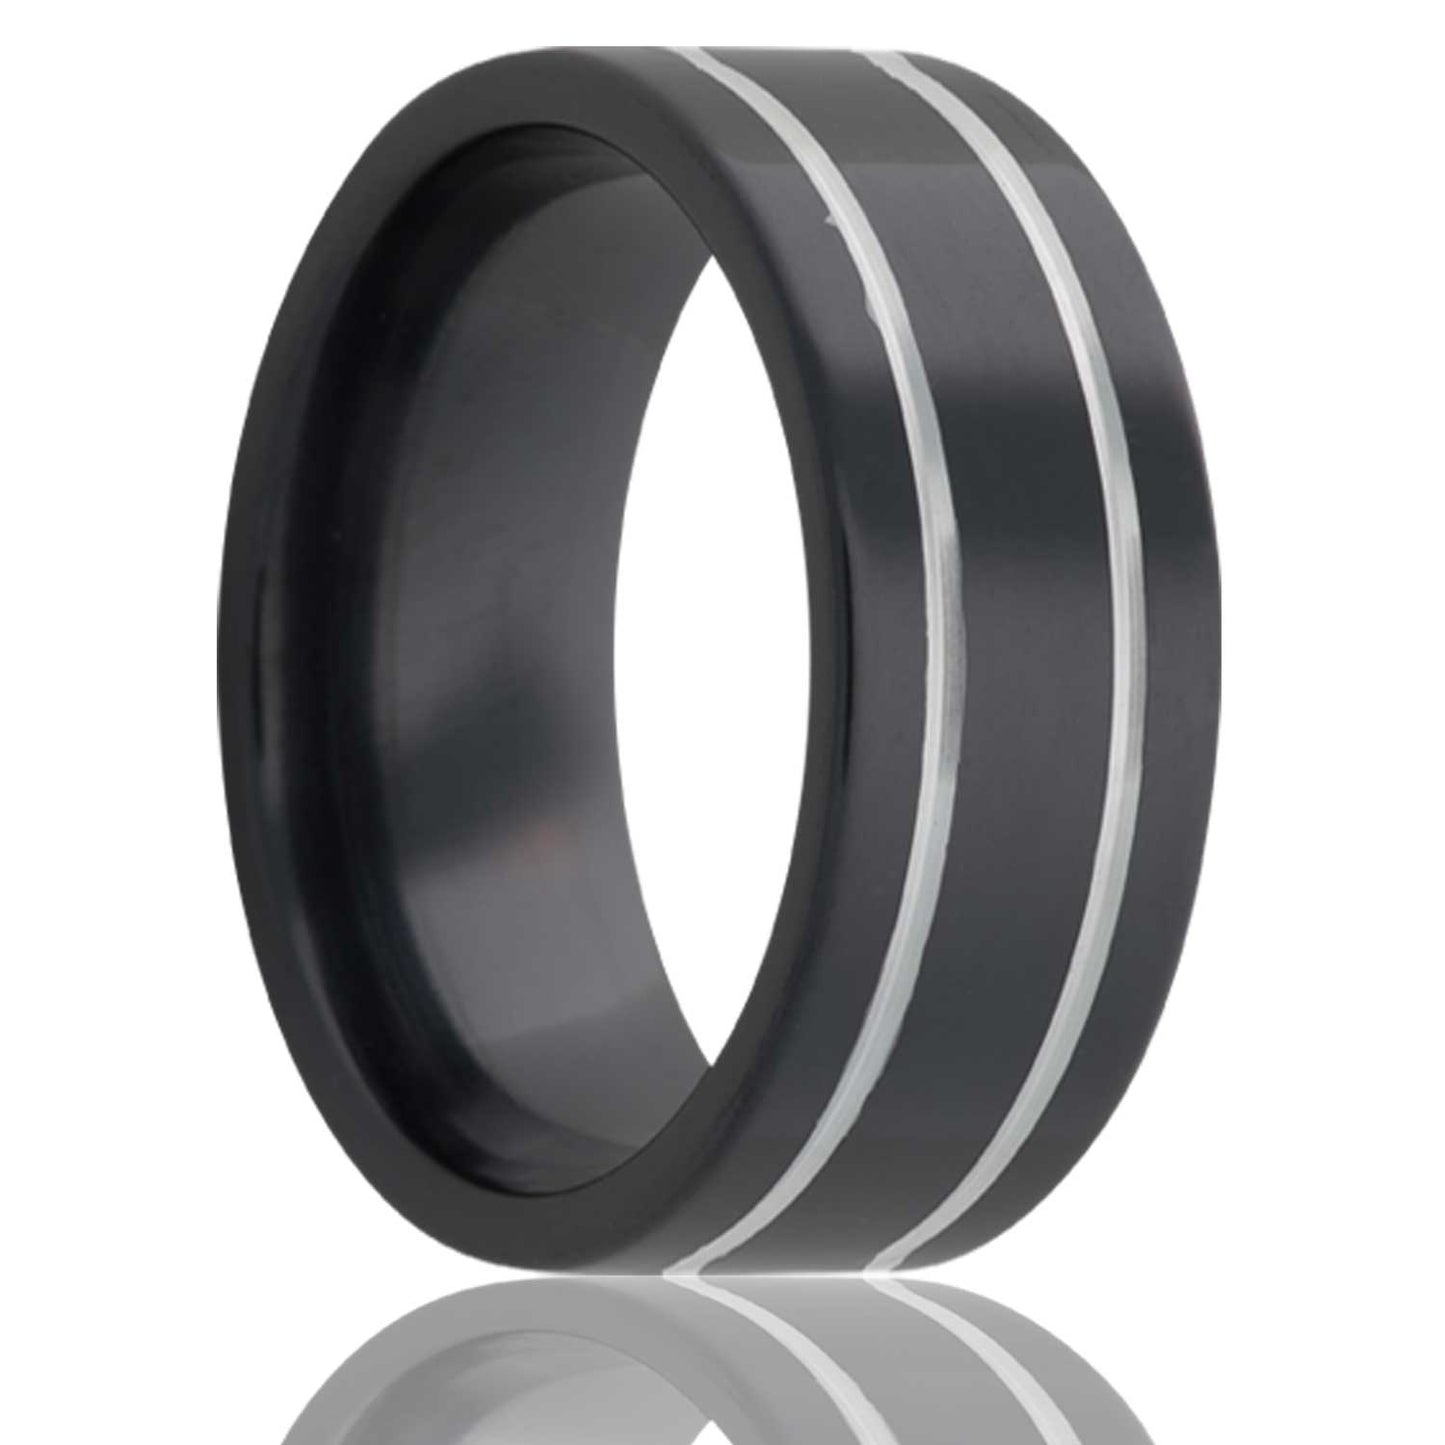 A grooved zirconium wedding band with dual grooves displayed on a neutral white background.